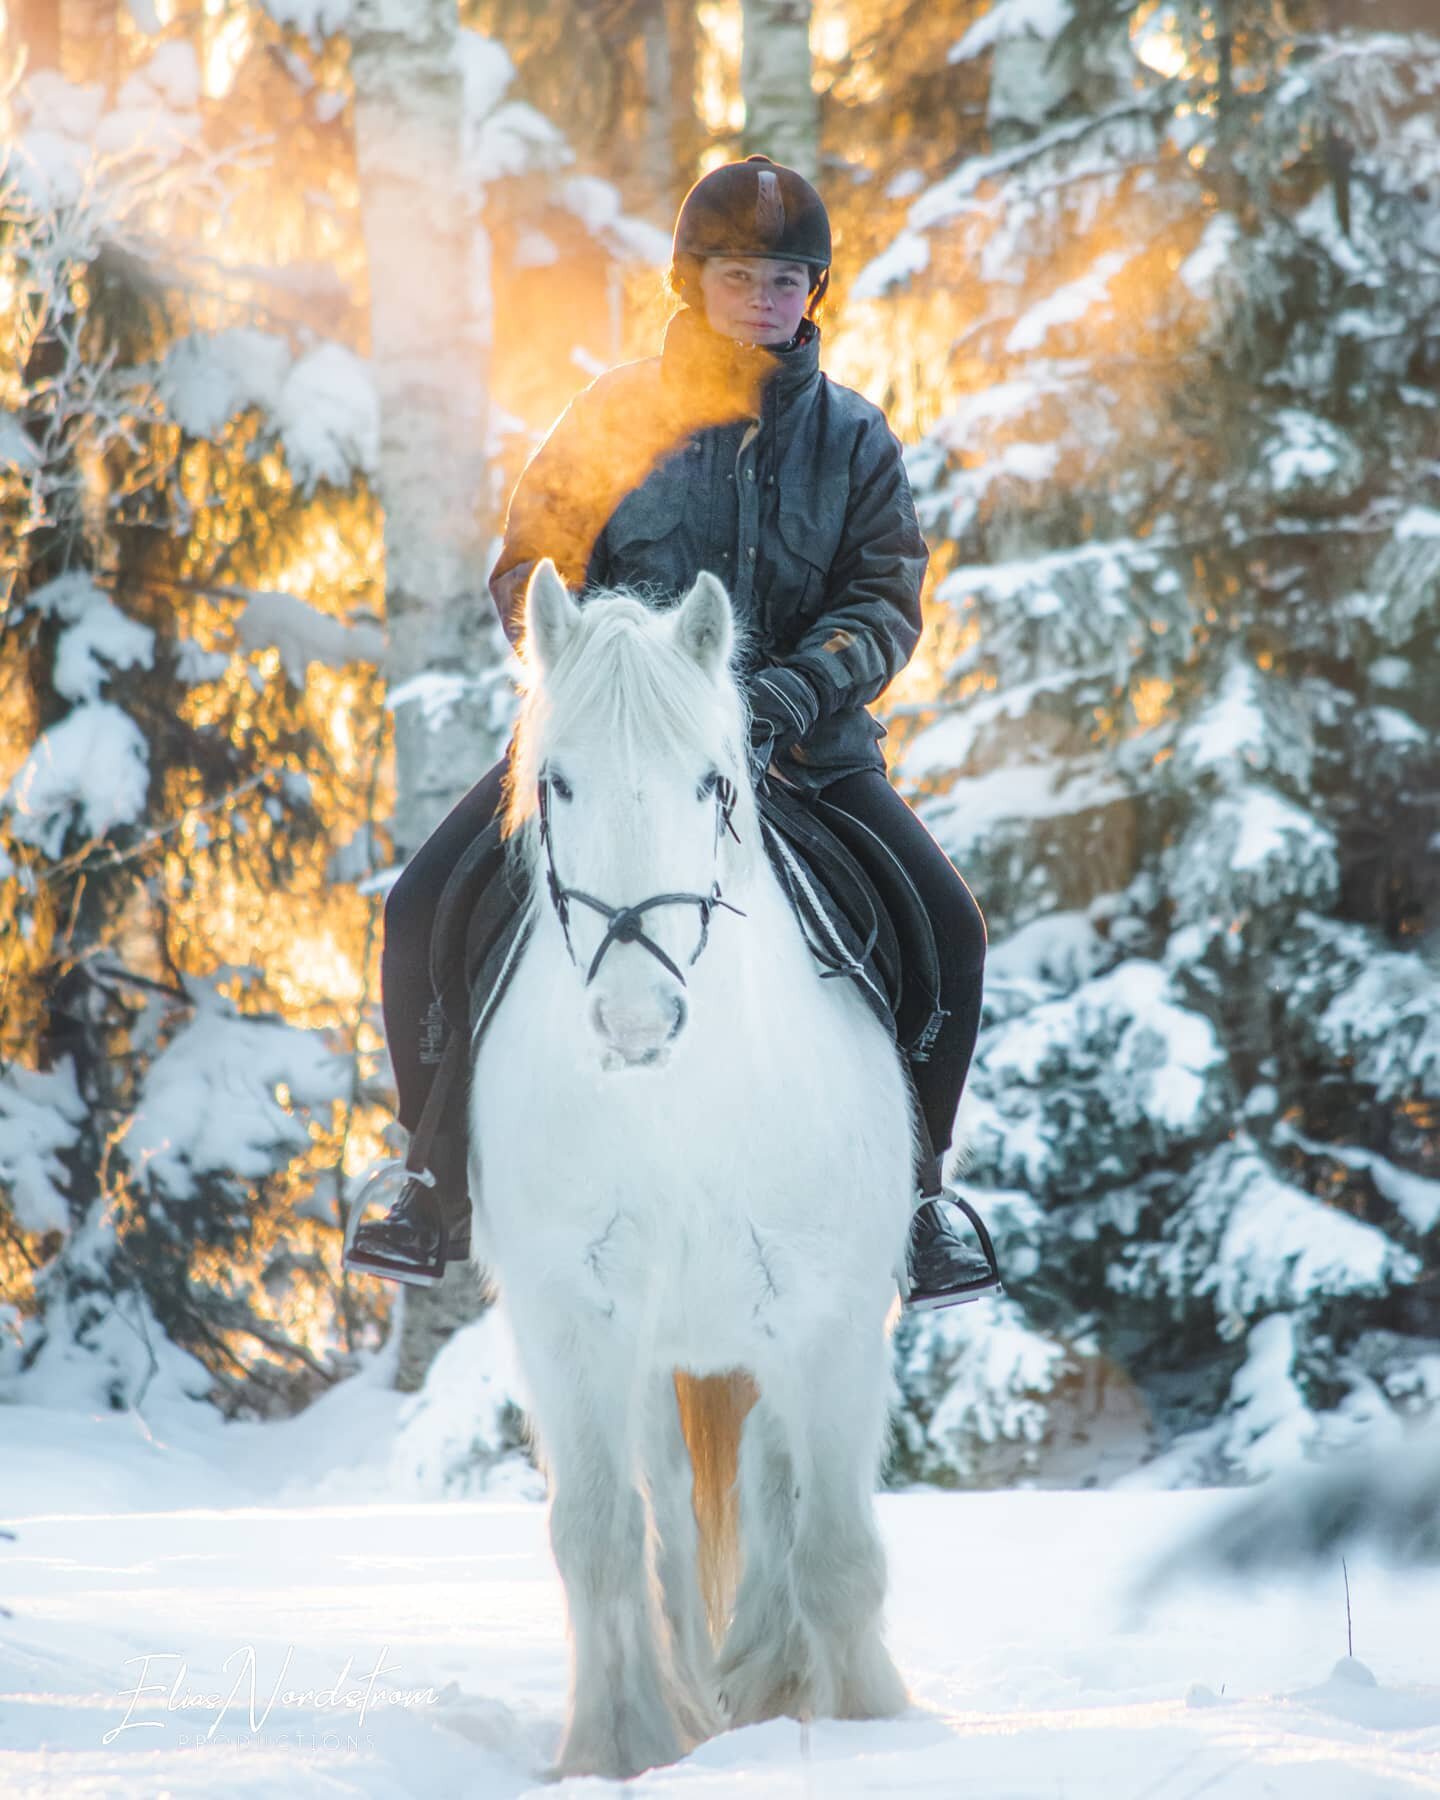 From last weeks photoshoot📷🐴

#enordstromphotography #eliasnordstromproductions #horse #riding #winter #sun 

_______________

Want to book me as a photographer? 
➡️ eliasnordstromproductions.com